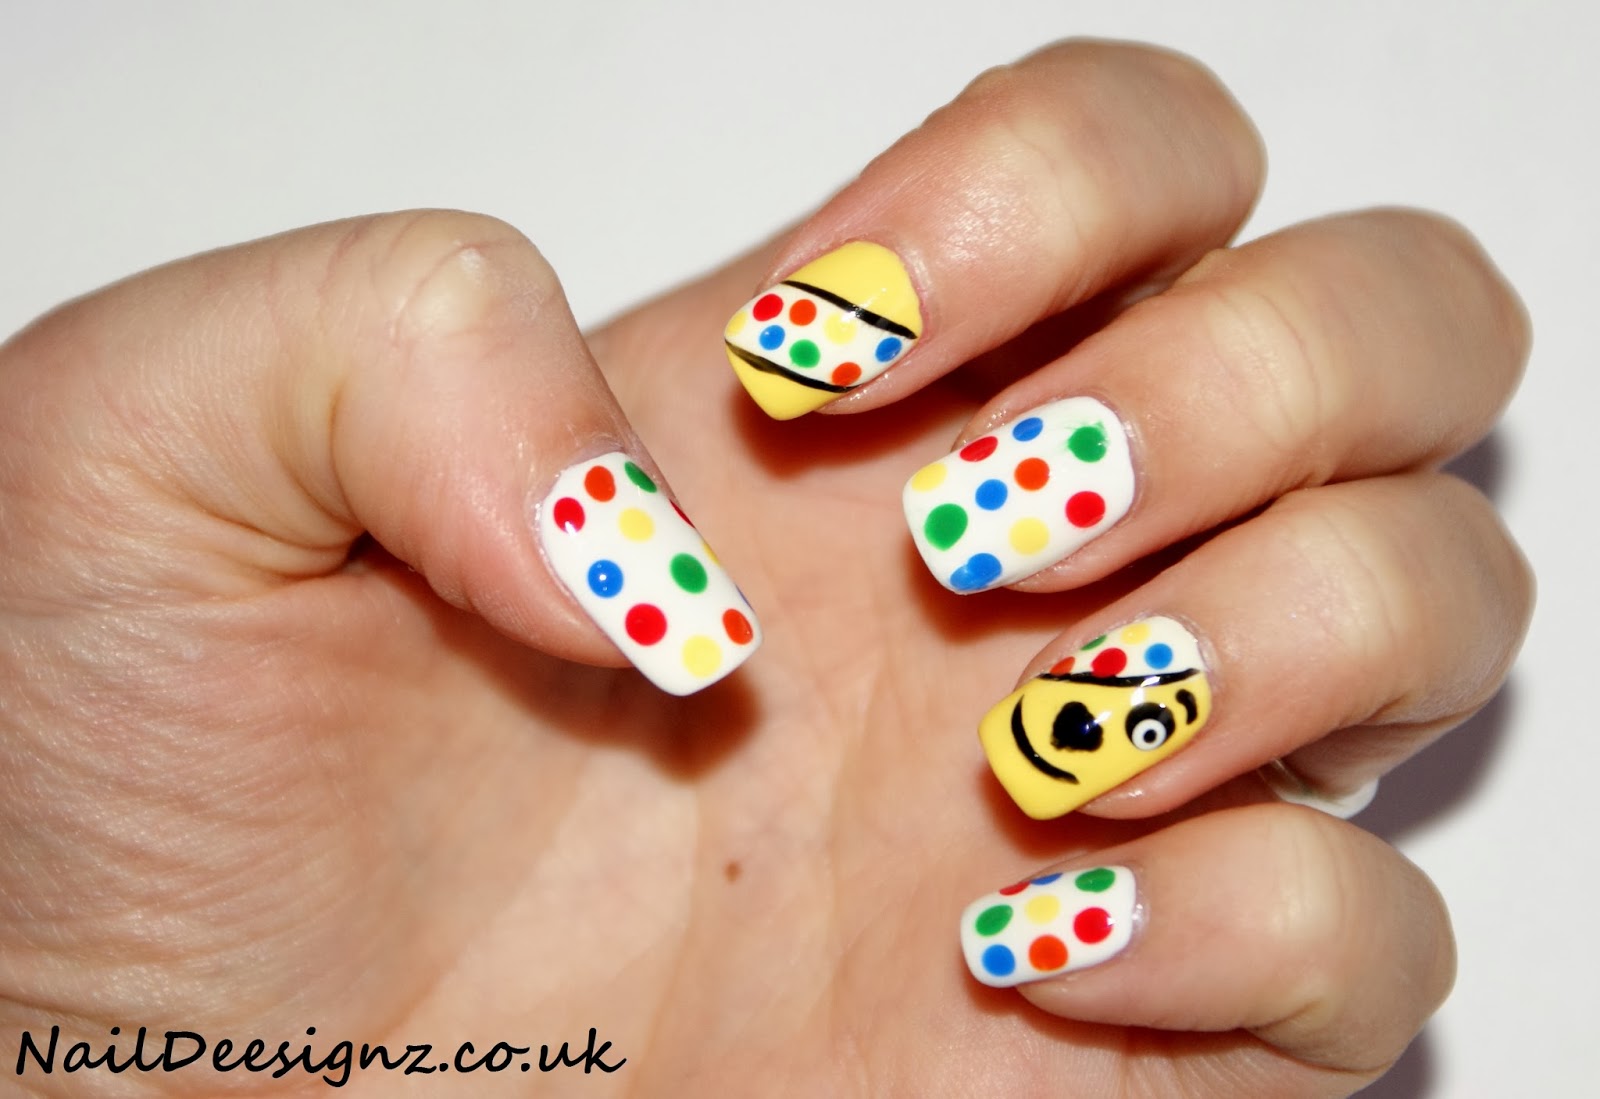 1. Easy Nail Art for Kids with Short Nails - wide 8